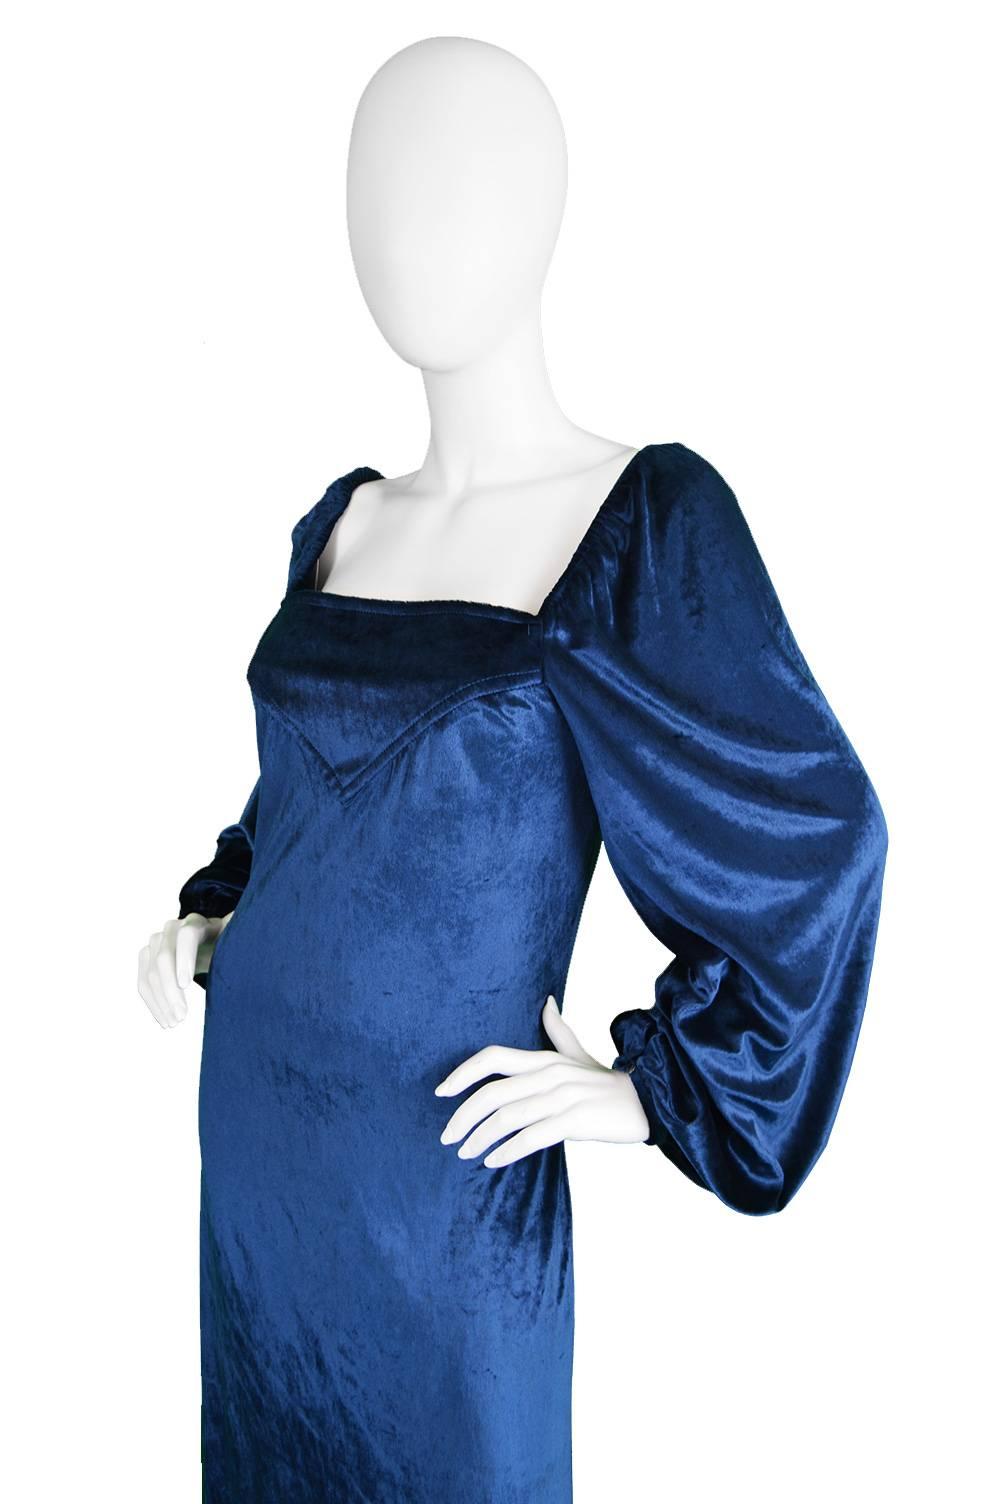 An incredibly elegant vintage evening gown from the 1970s by genius and highly collectible British designer, Janice Wainwright for Simon Massey, who she designed for before starting her own label. This would have been from one of her last